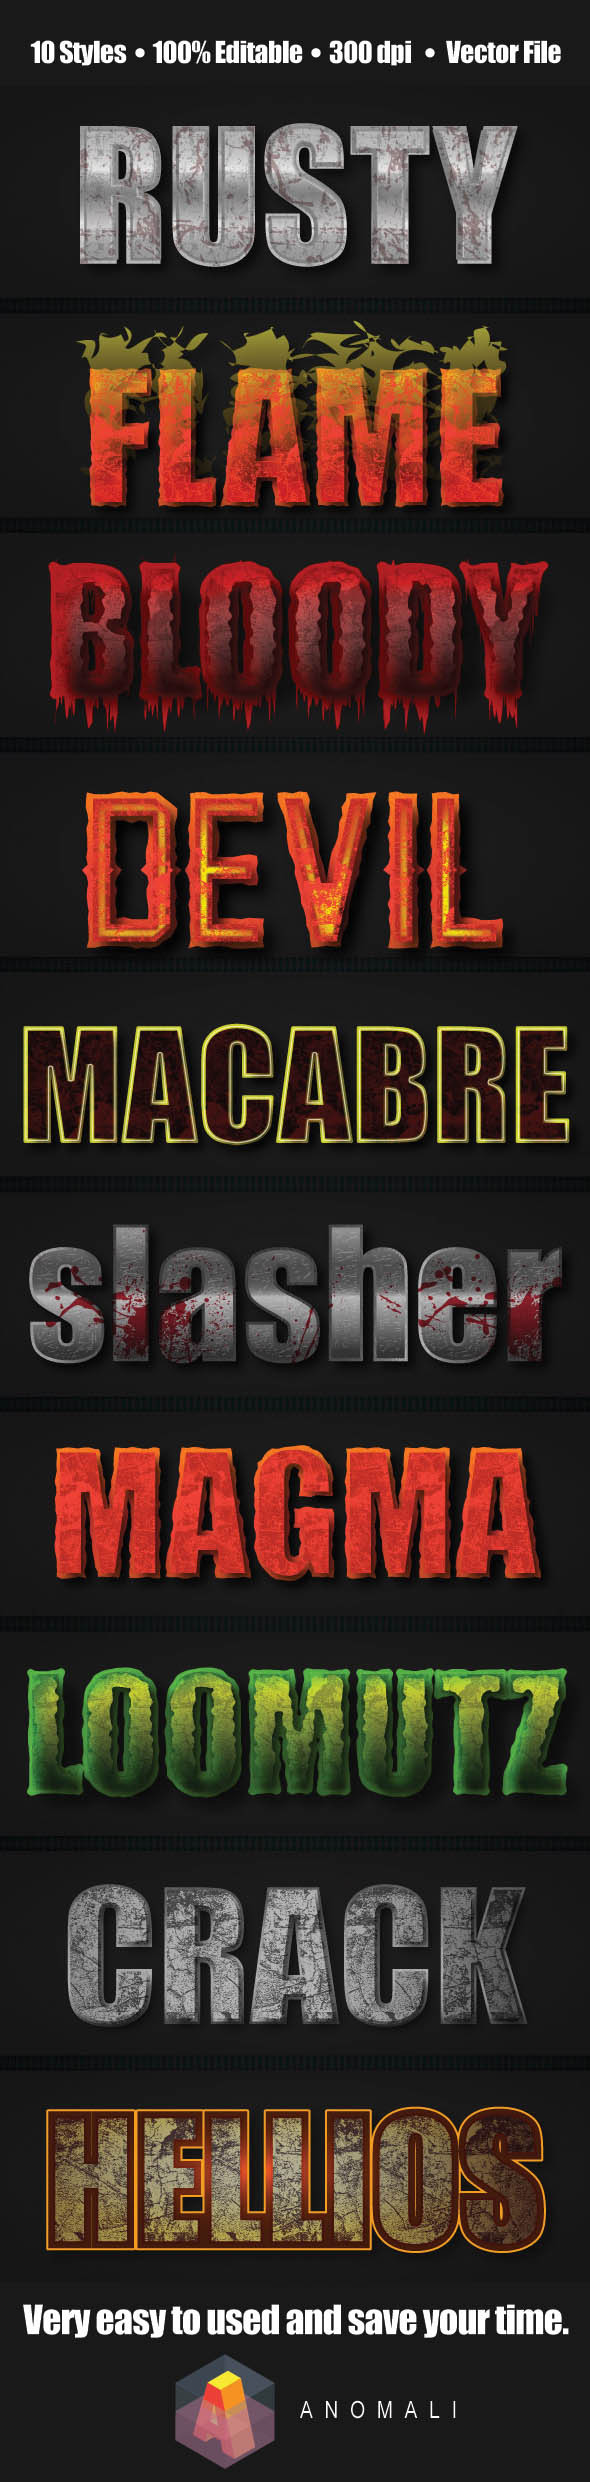 Horror and macabre graphic style preview